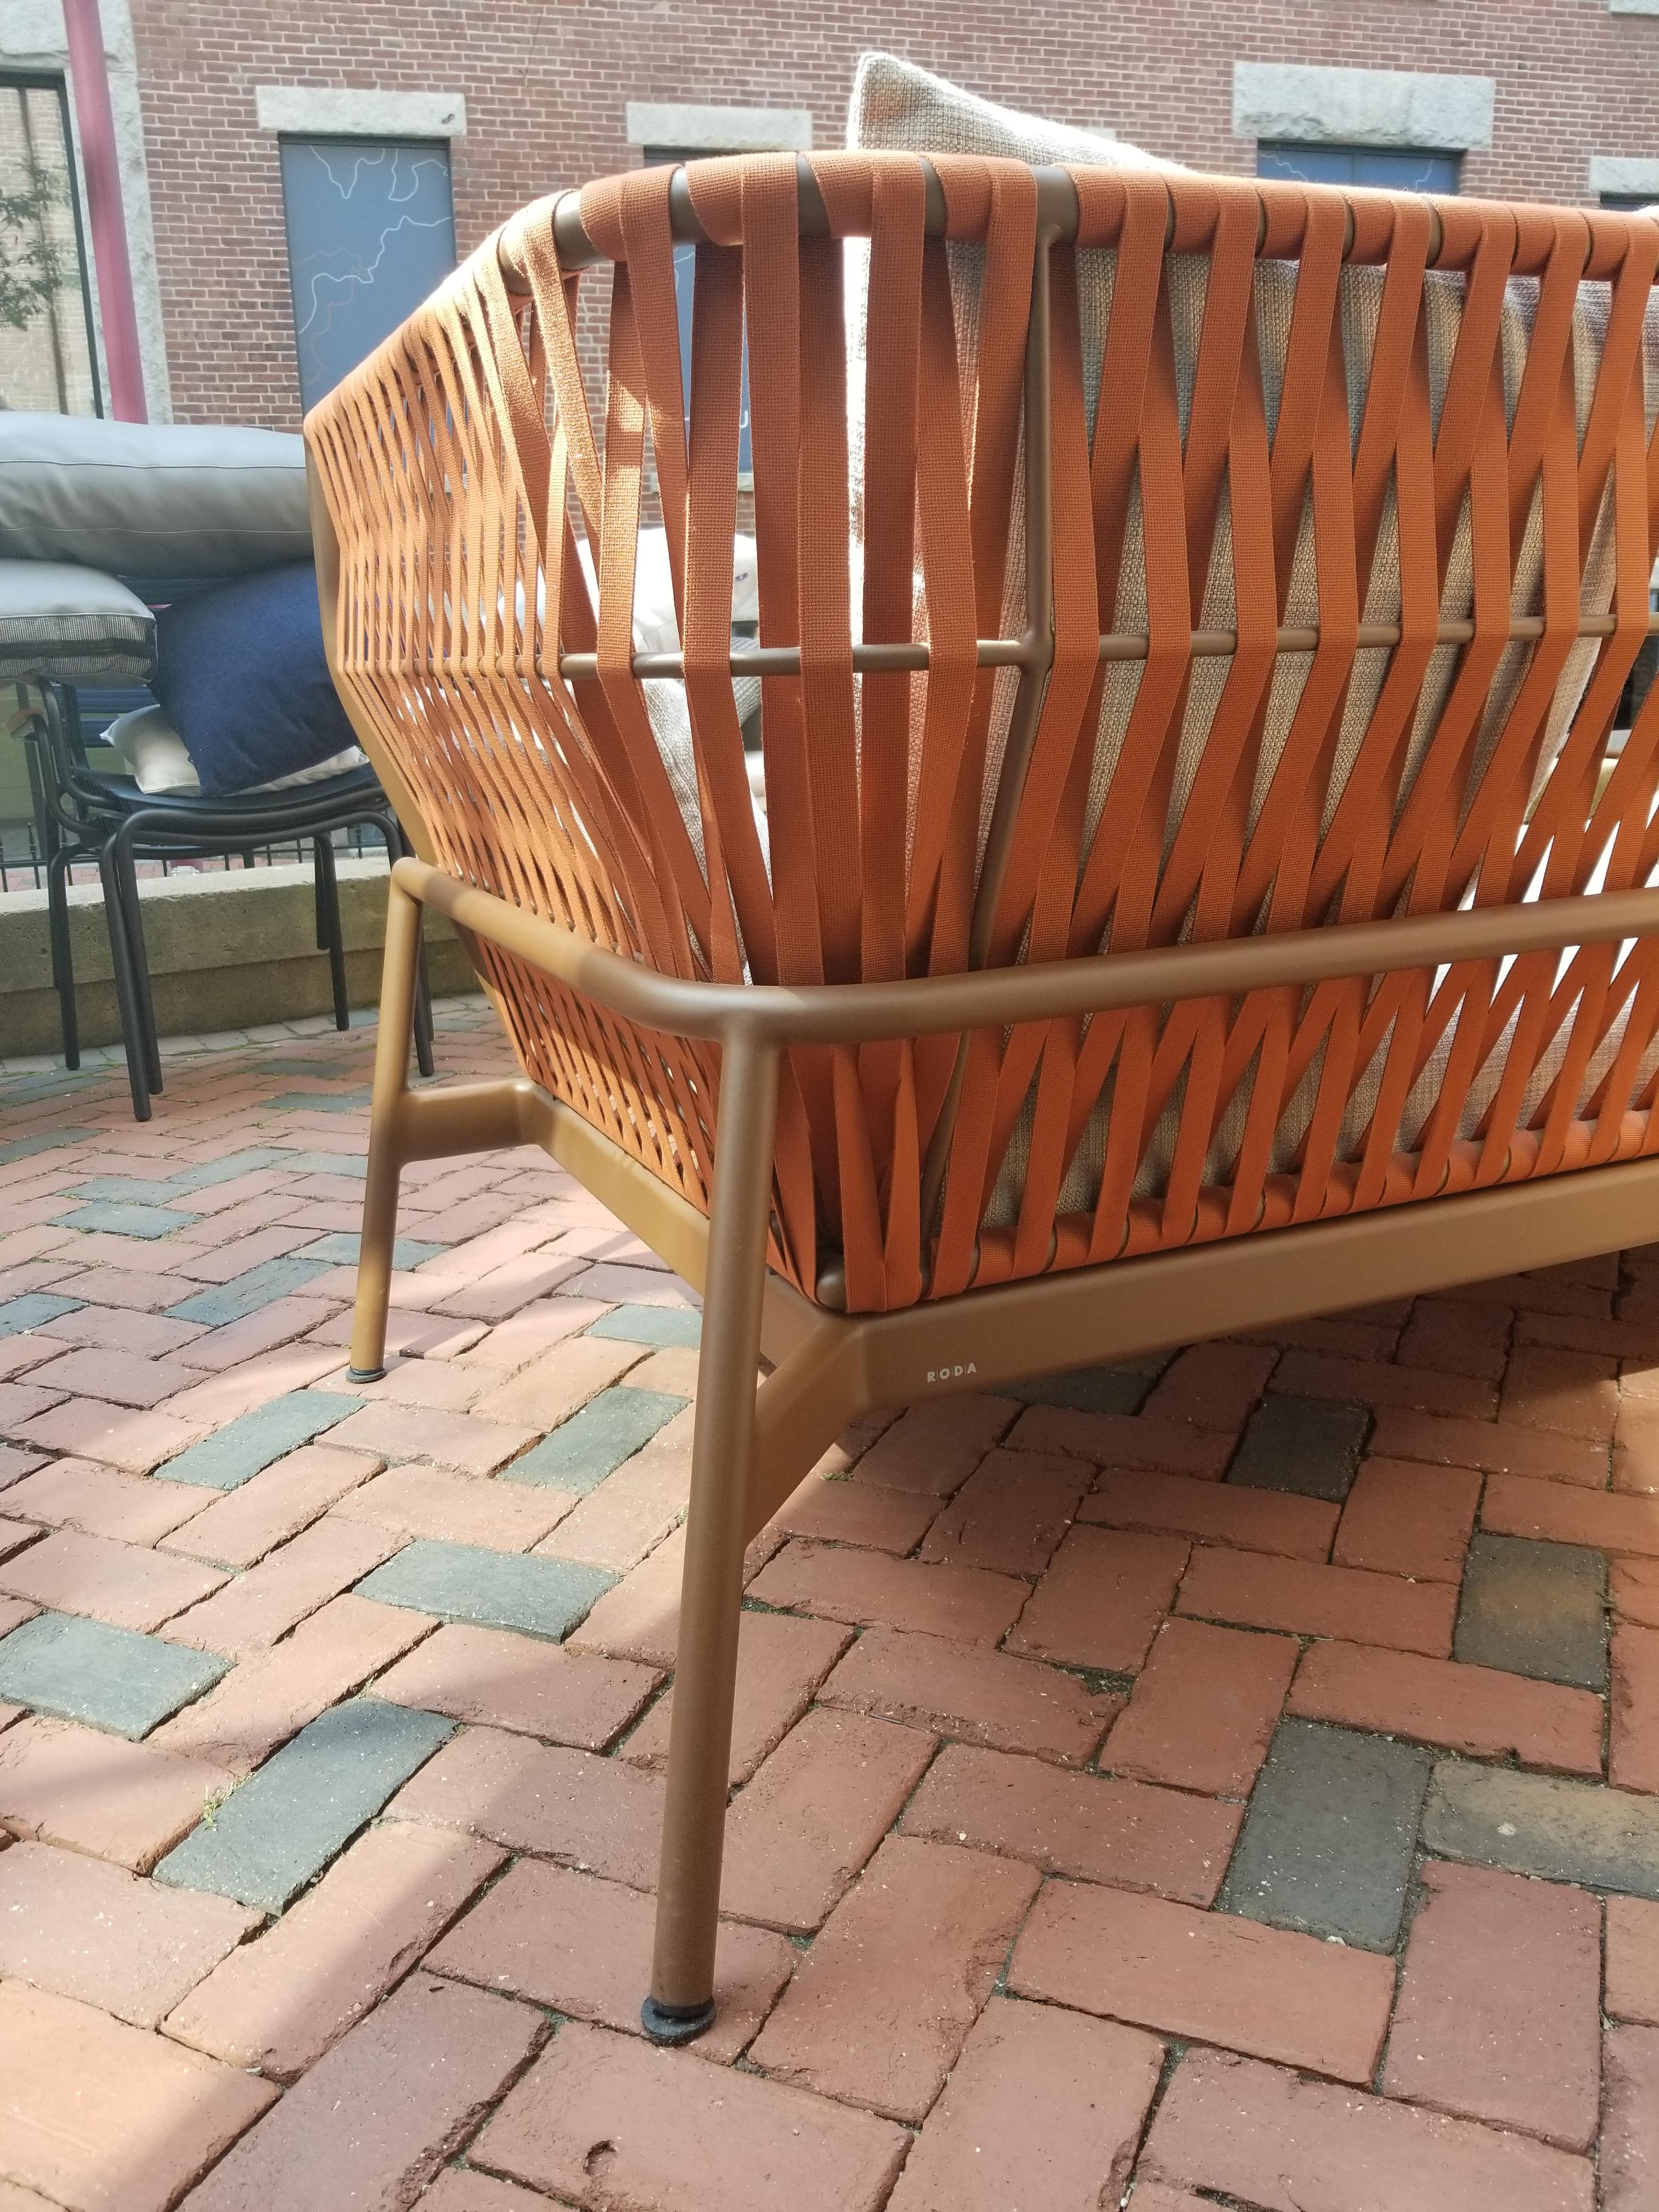 Designed by Rodolfo Dordoni

This item is part of our outdoor display.

Frame Finish: Rust

Belt Finish: Orange

Fabric: Park K01 Sand

Includes 3 Seat Cushions, 3 Back Cushions, and 2 Arm Cushions

Throw Pillows Sold Separately

Hydro